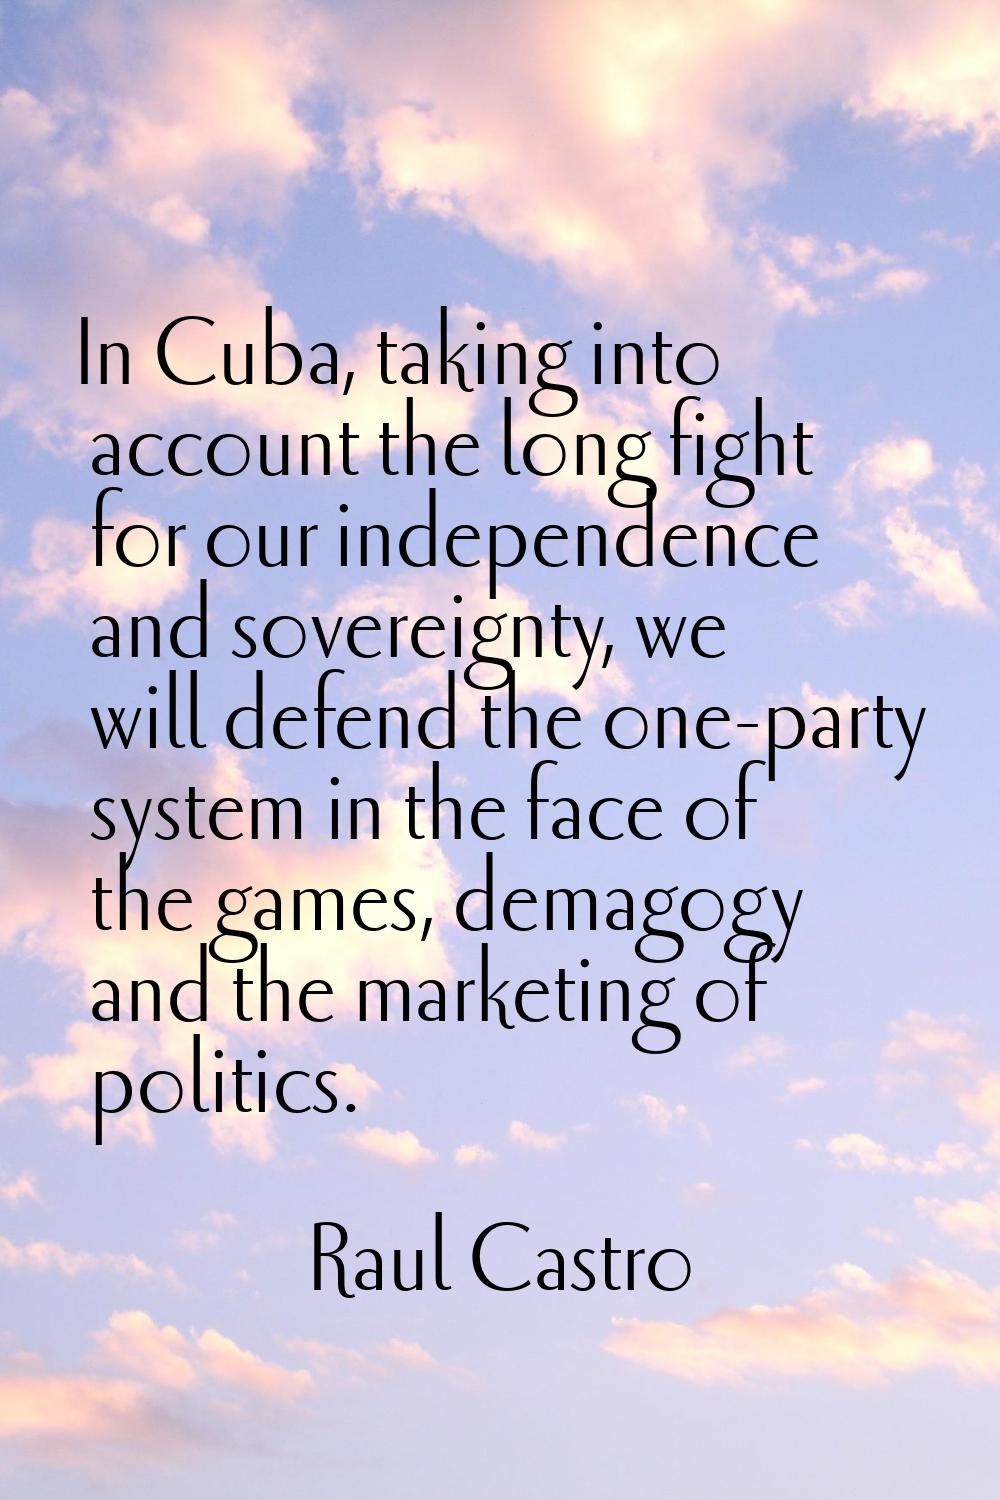 In Cuba, taking into account the long fight for our independence and sovereignty, we will defend th